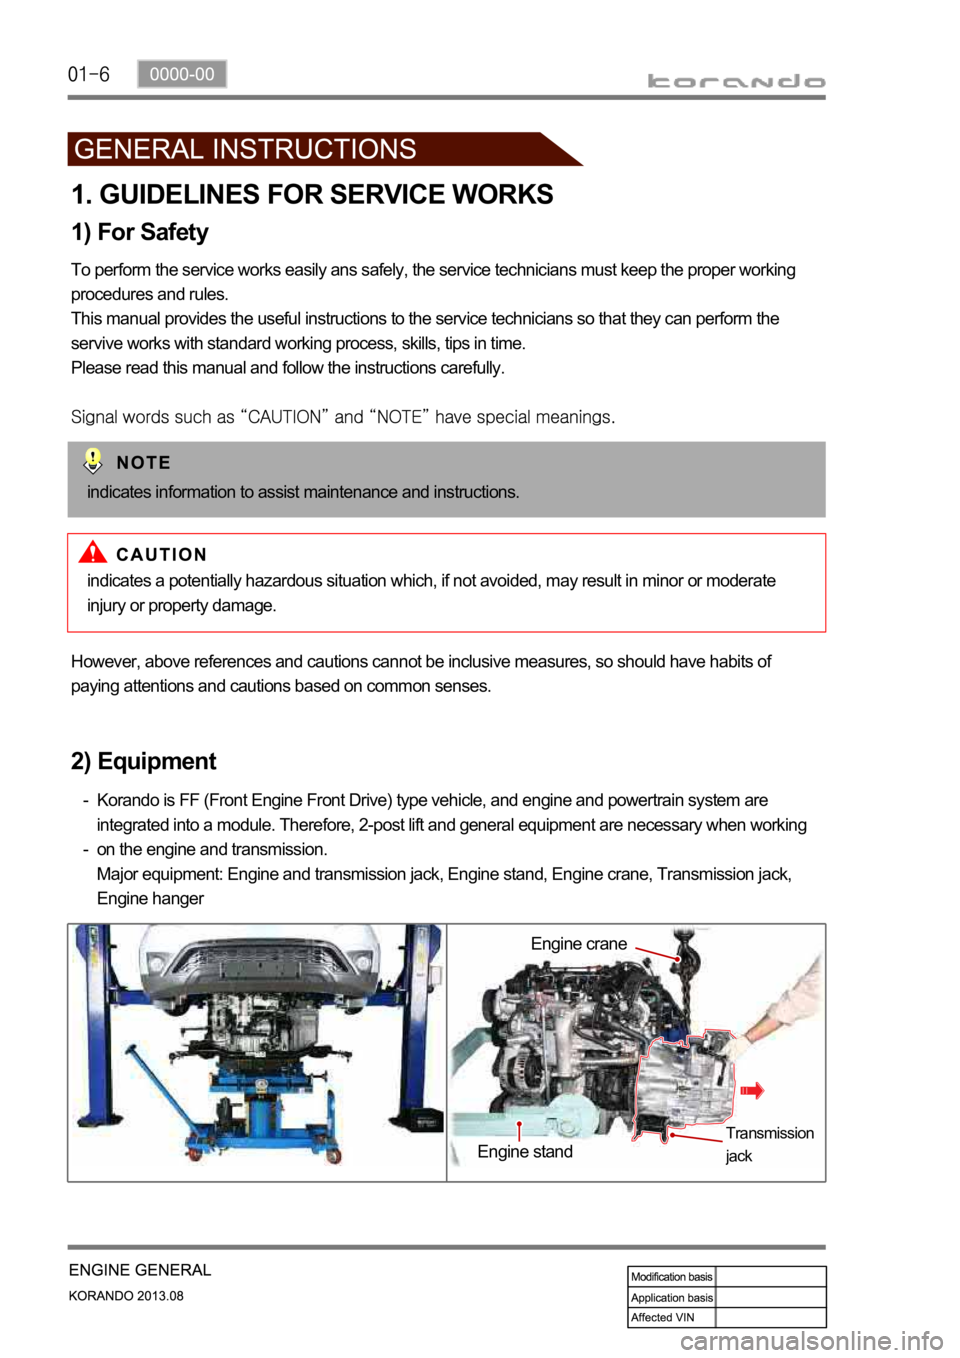 SSANGYONG KORANDO 2013  Service Manual 1. GUIDELINES FOR SERVICE WORKS
1) For Safety
To perform the service works easily ans safely, the service technicians must keep the proper working 
procedures and rules.
This manual provides the usefu